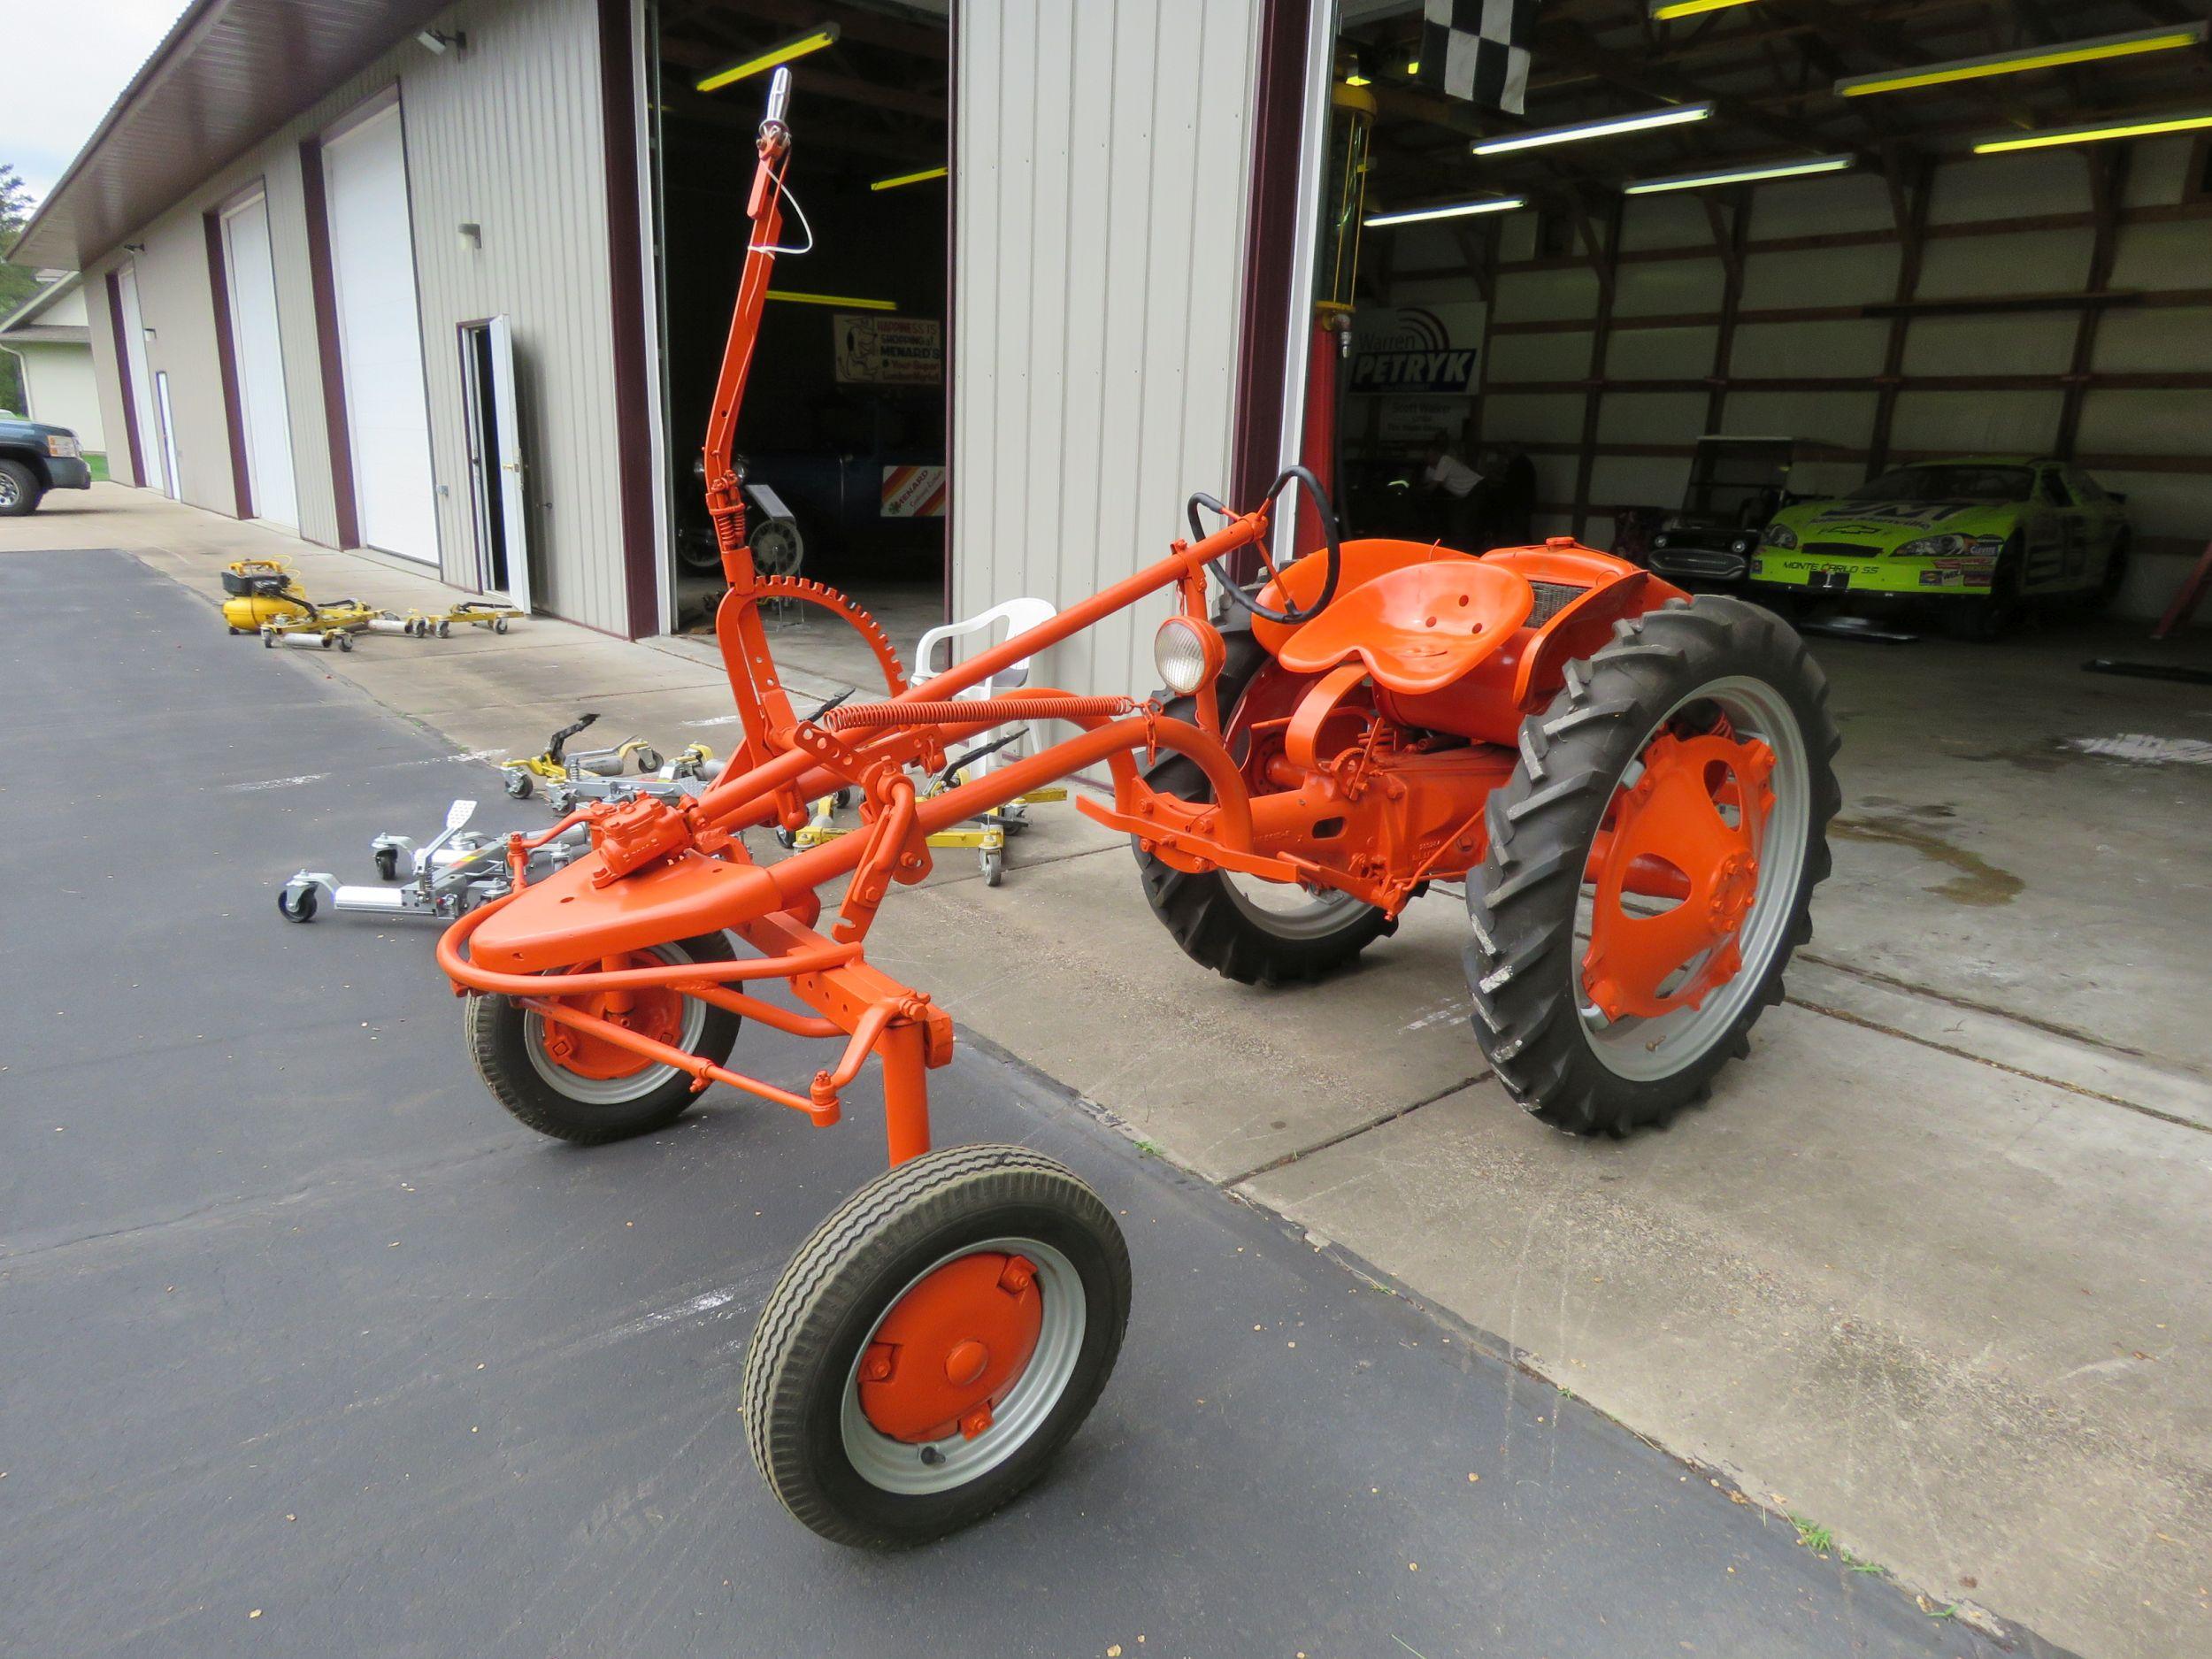 1949 G Allis Chalmers Tractor